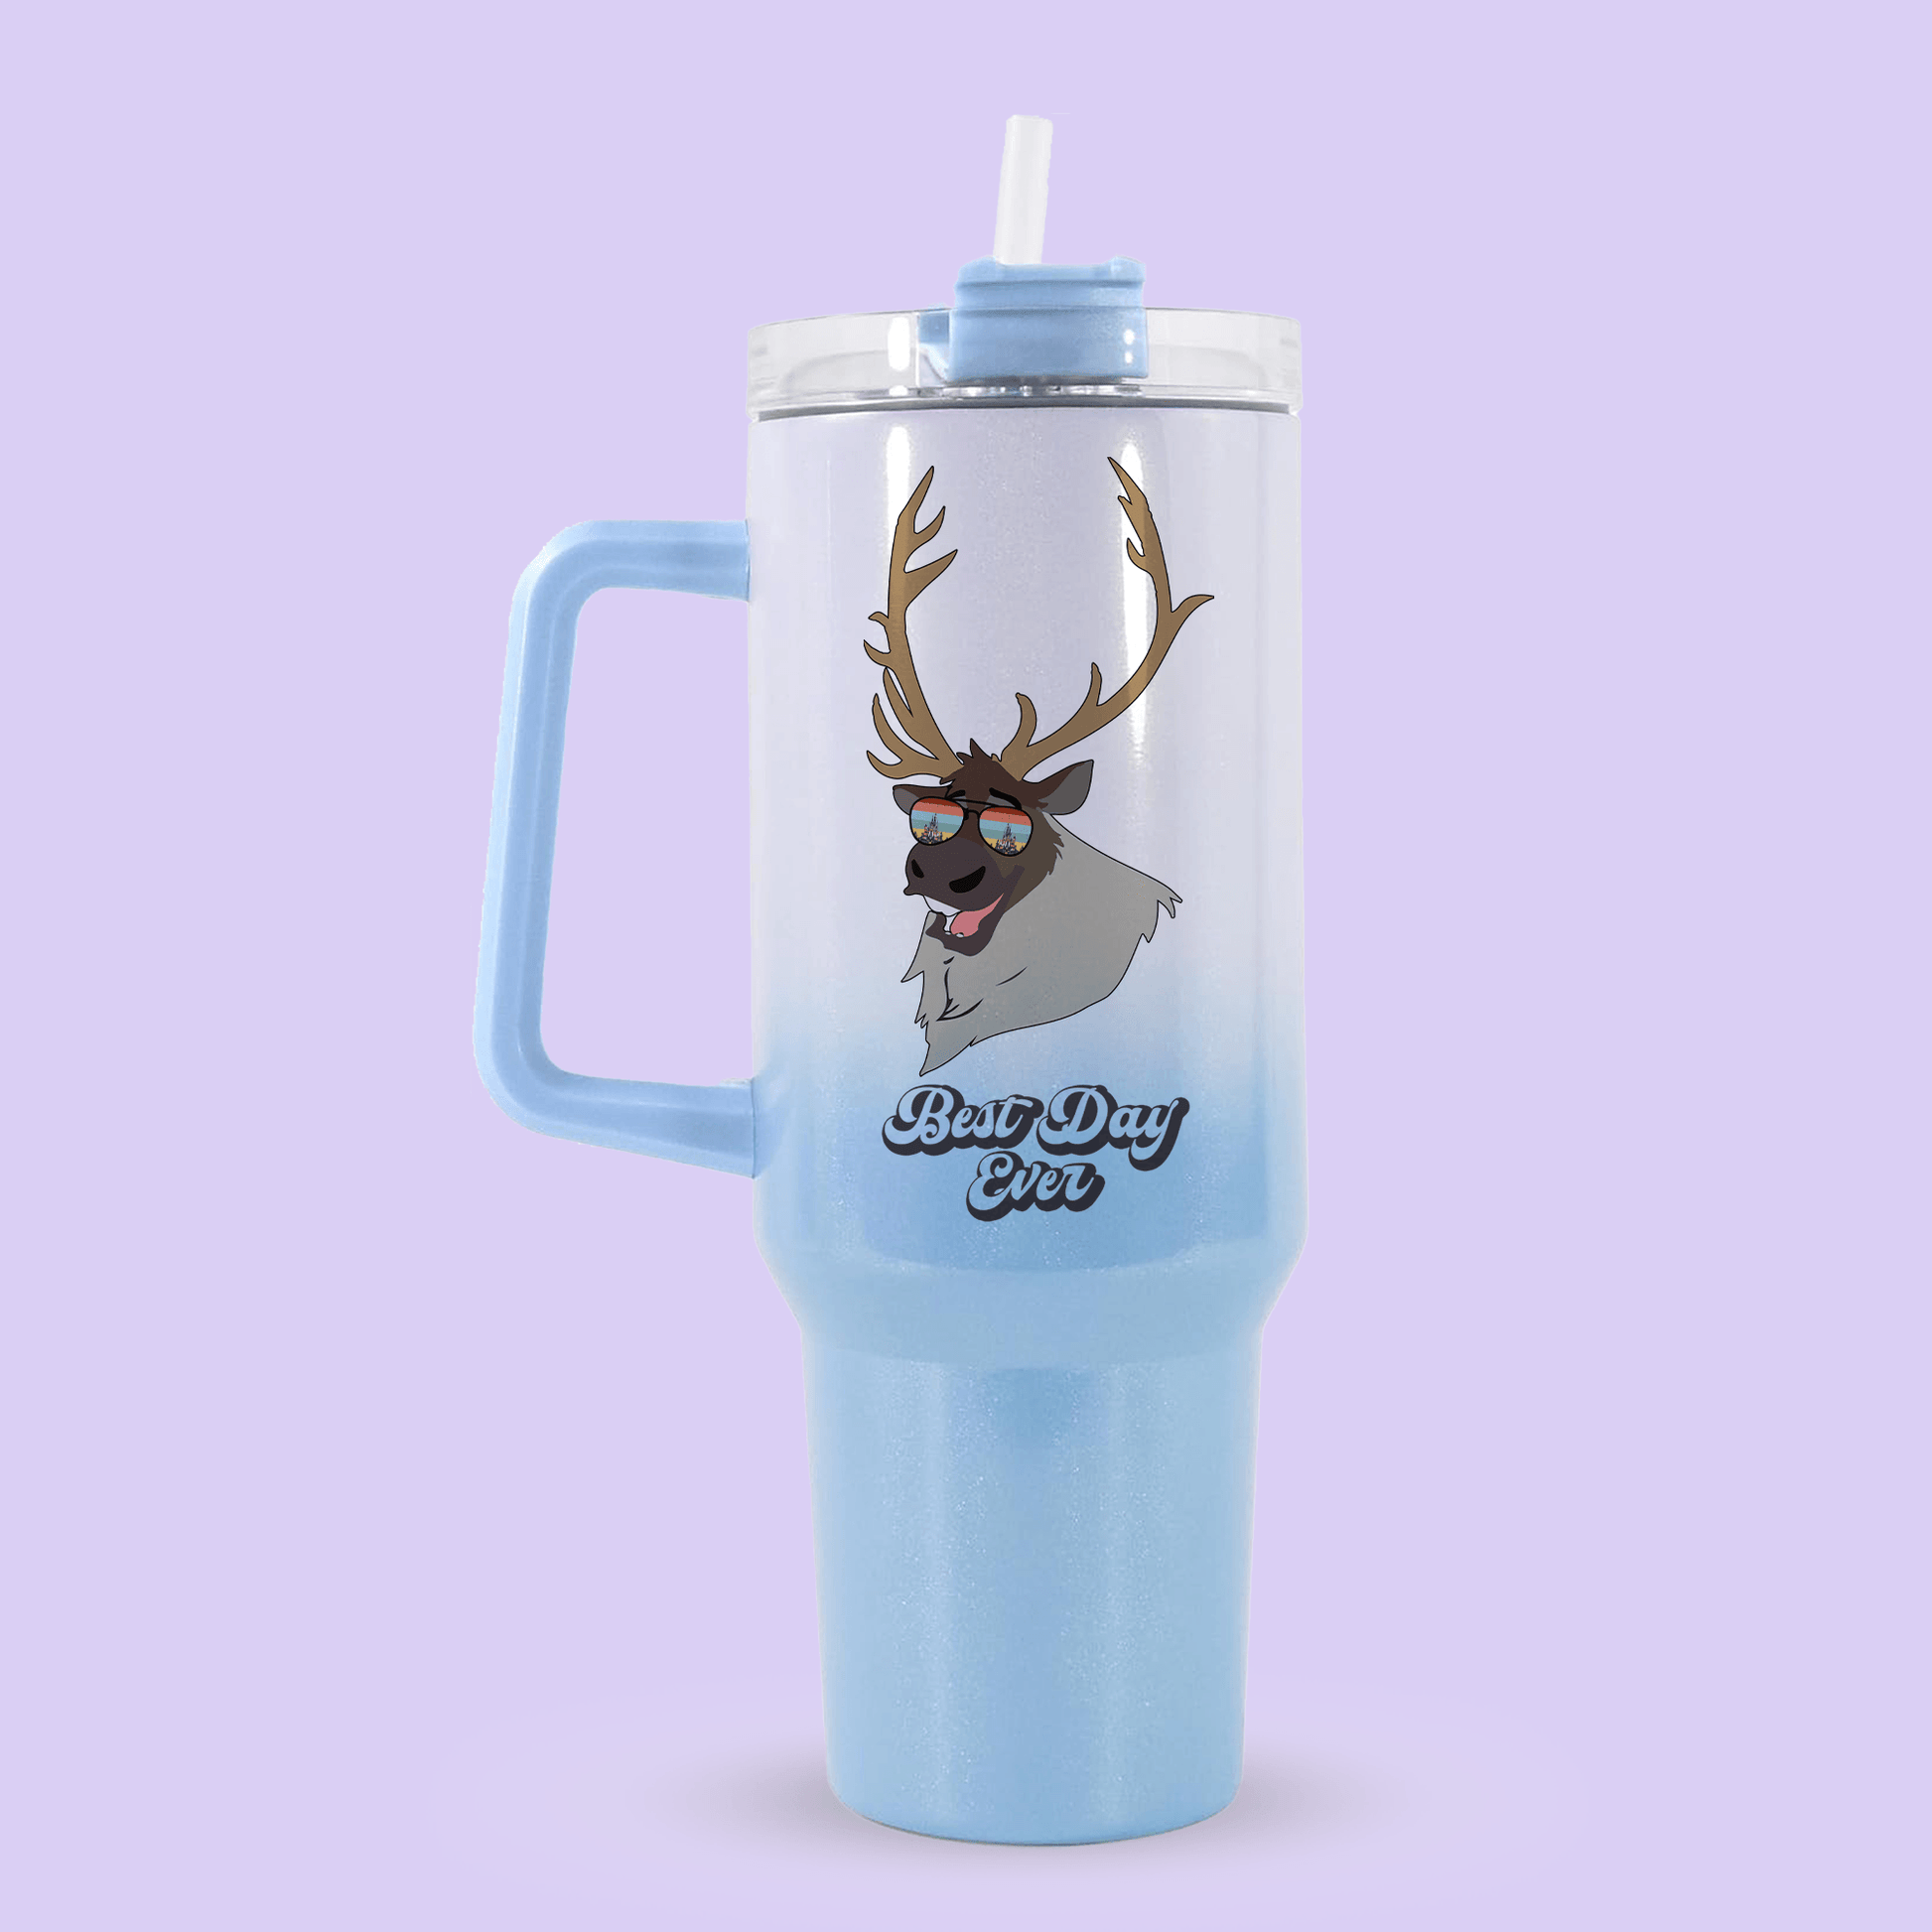 Disney Frozen Best Day Ever 40oz Quencher Tumbler - Sven - Two Crafty Gays